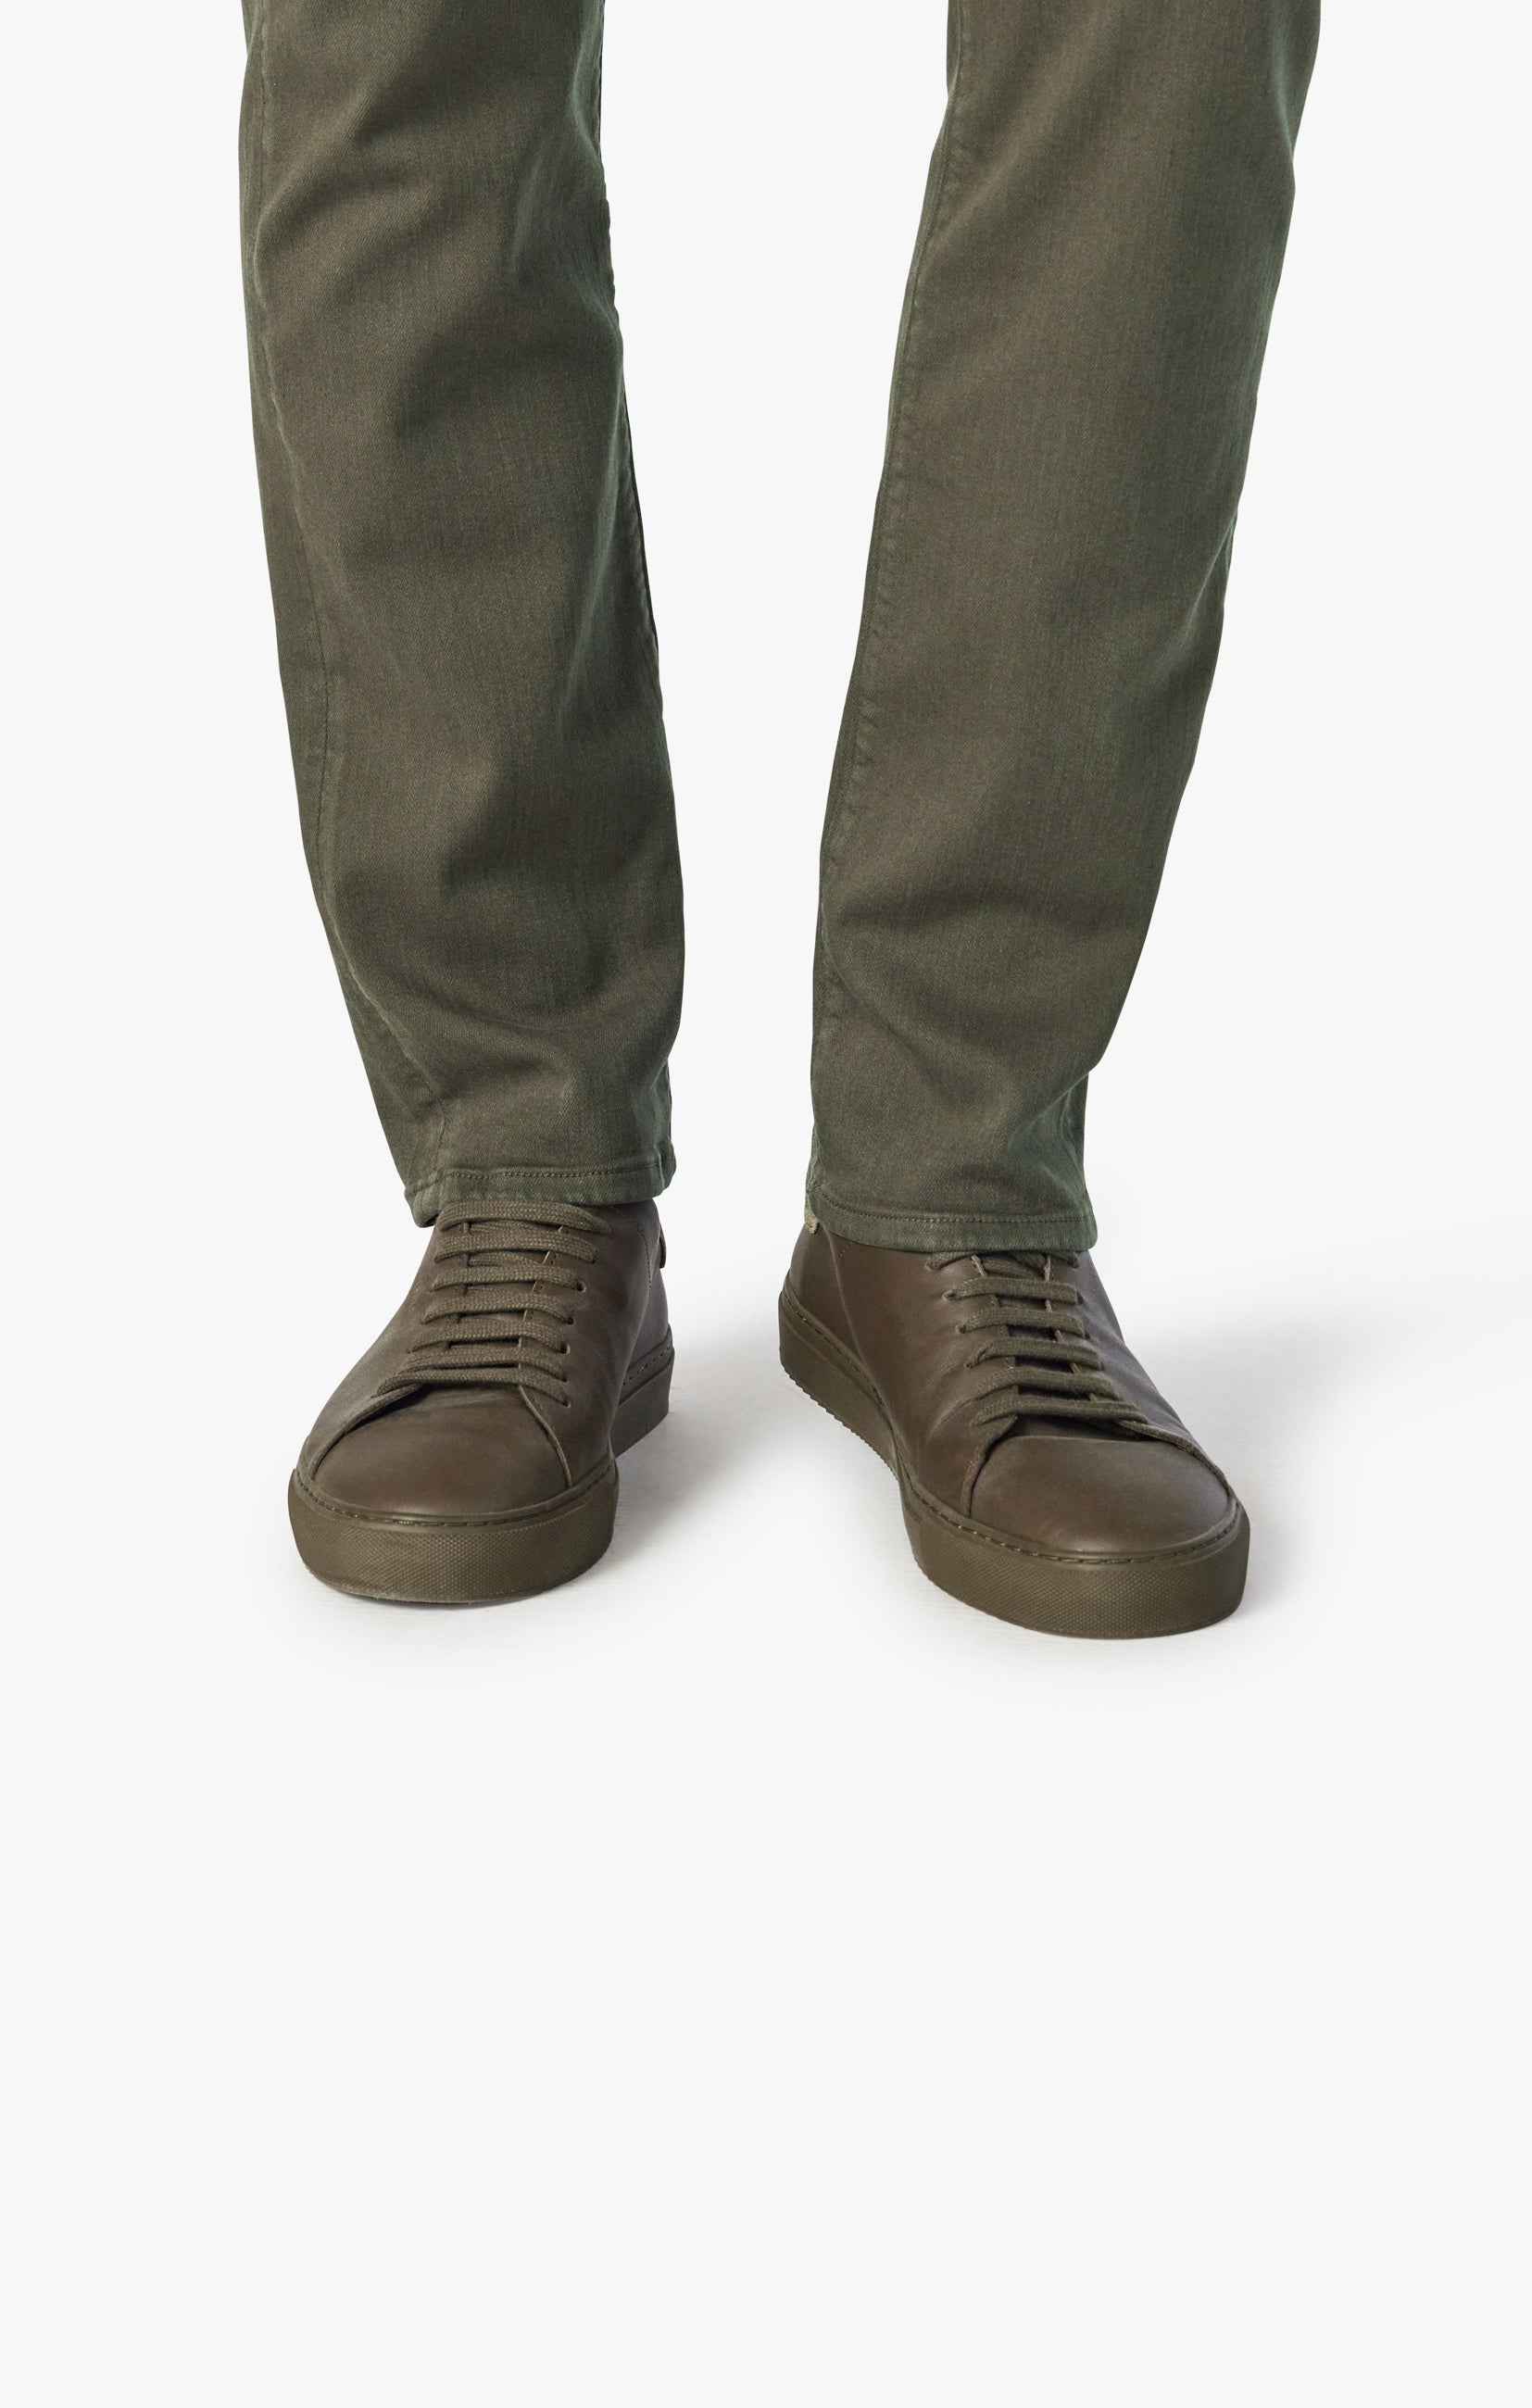 Charisma Classic Fit Pants in Green Comfort Image 6